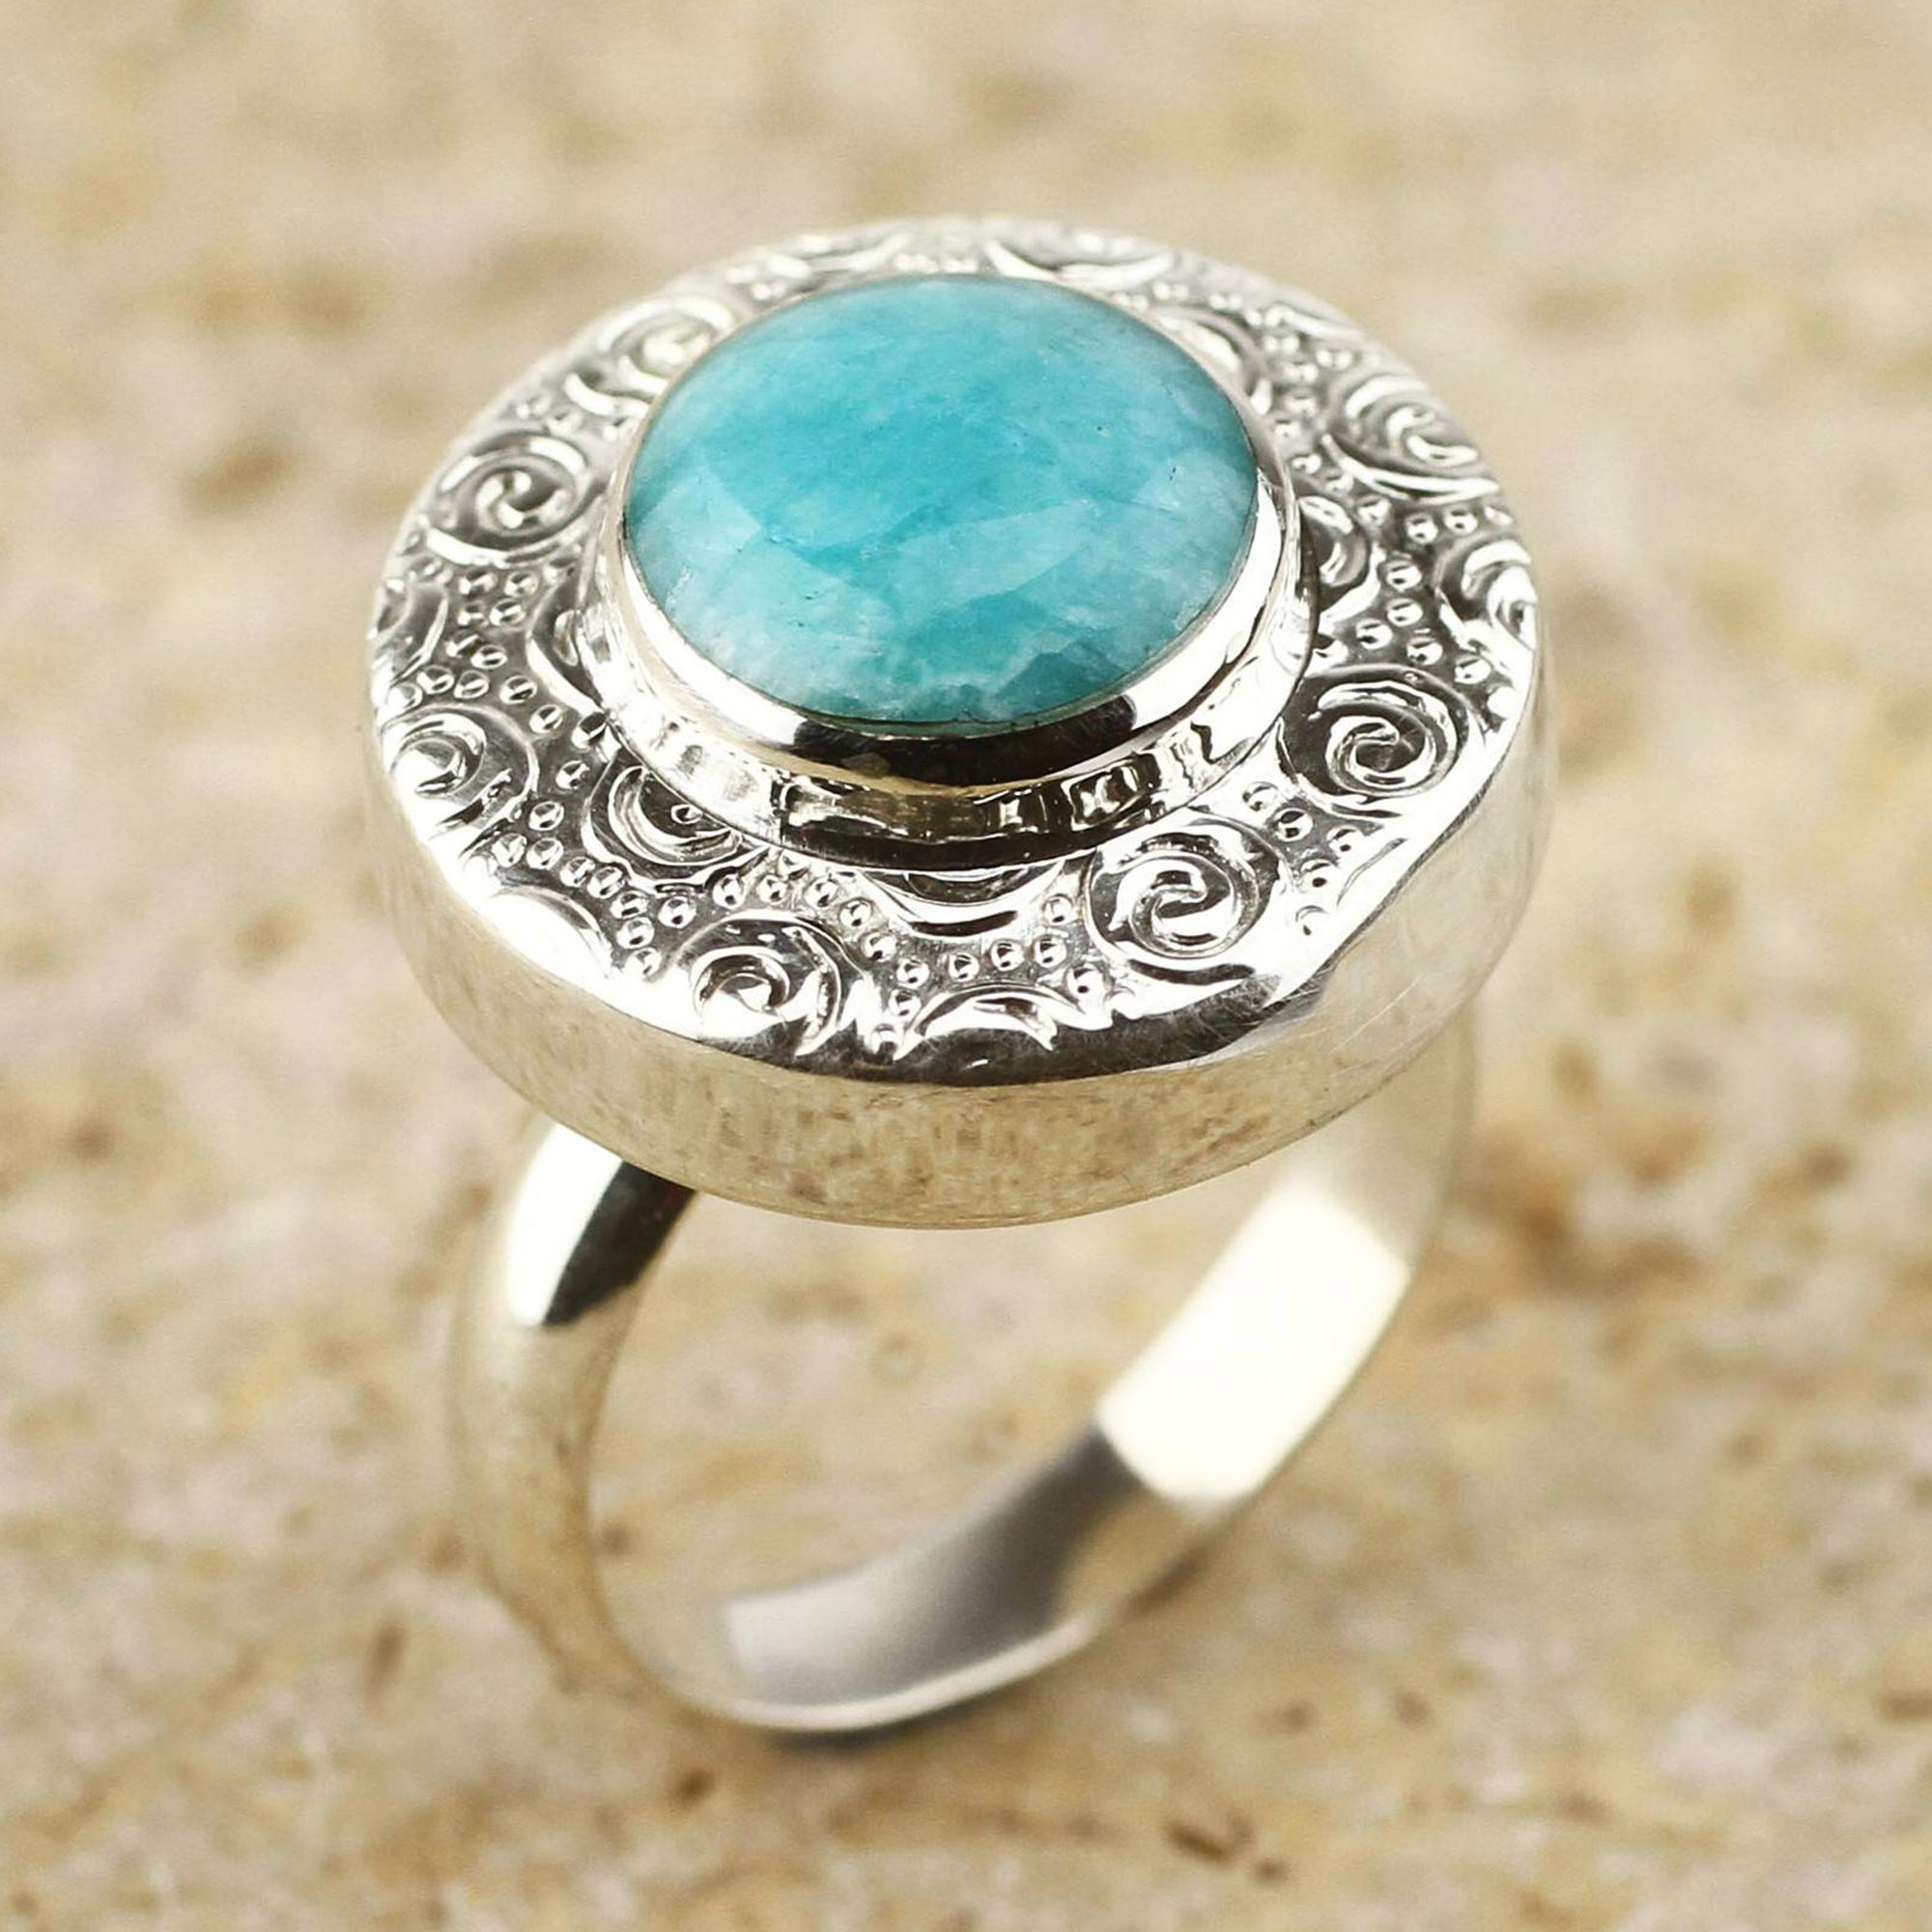 UNICEF Market | Fair Trade Sterling Silver and Amazonite Cocktail Ring ...